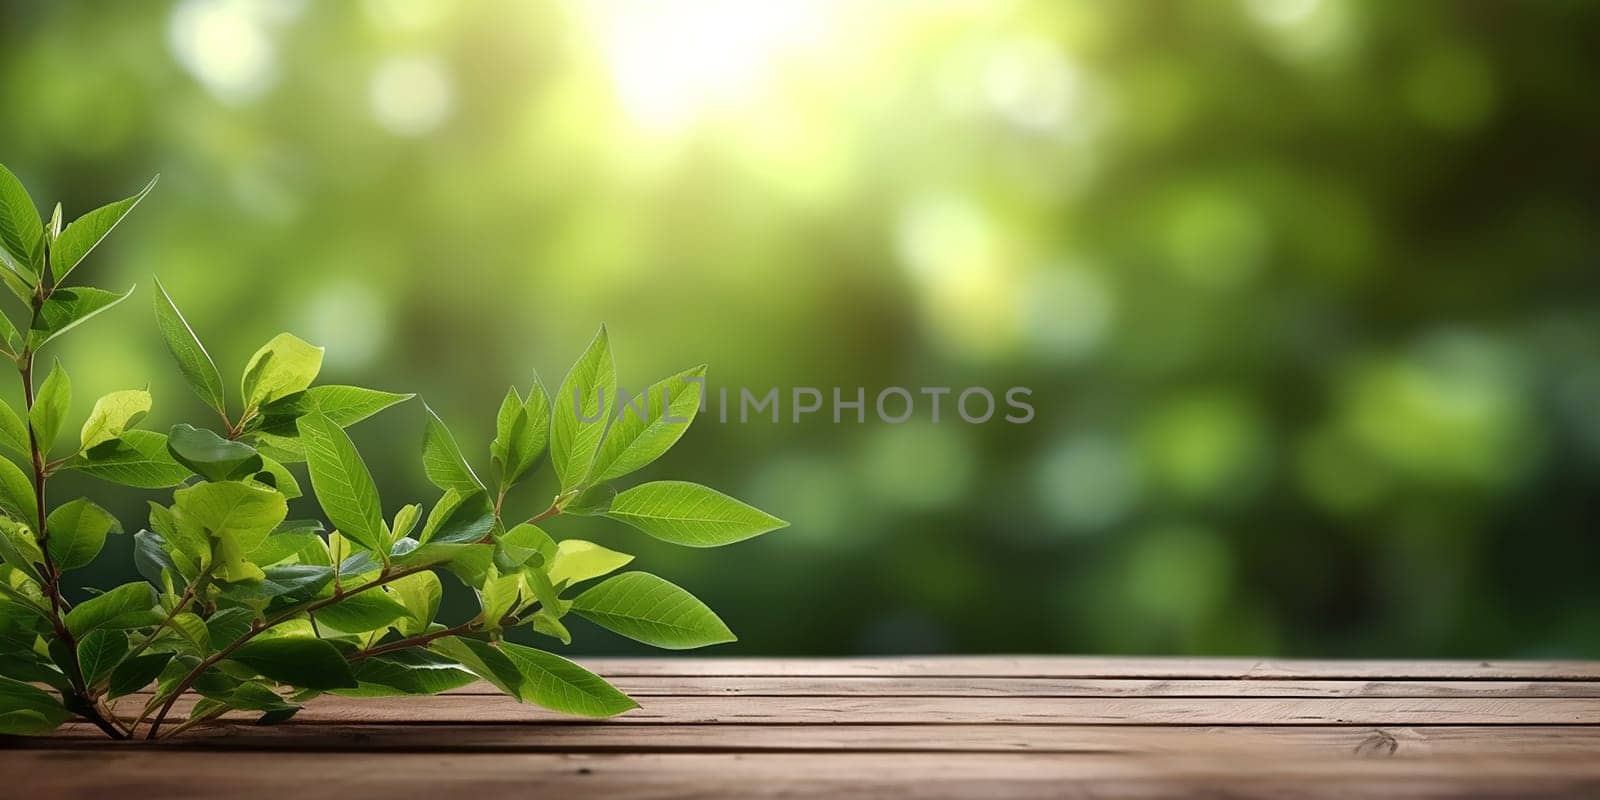 Green leaves on a wooden platform with a blurred forest background and sunshine.